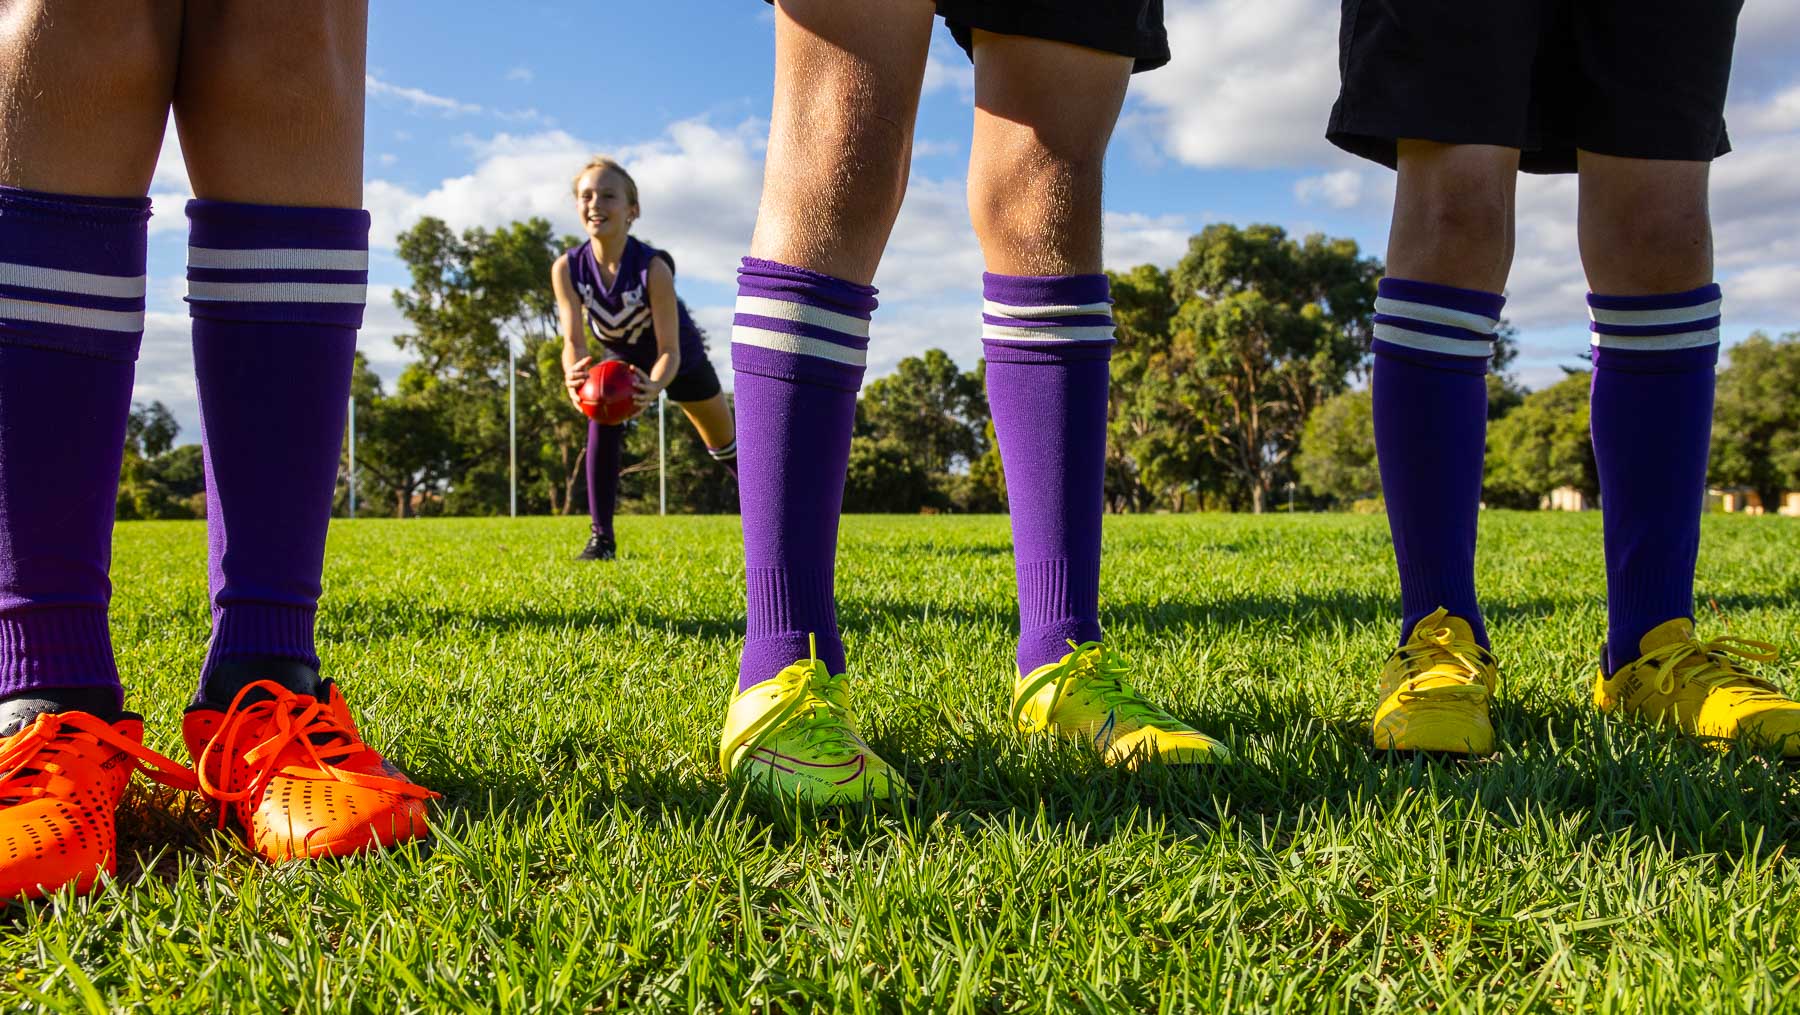 image with three pairs of legs wearing footy boots and long purple sock with one child behind handling AFL football